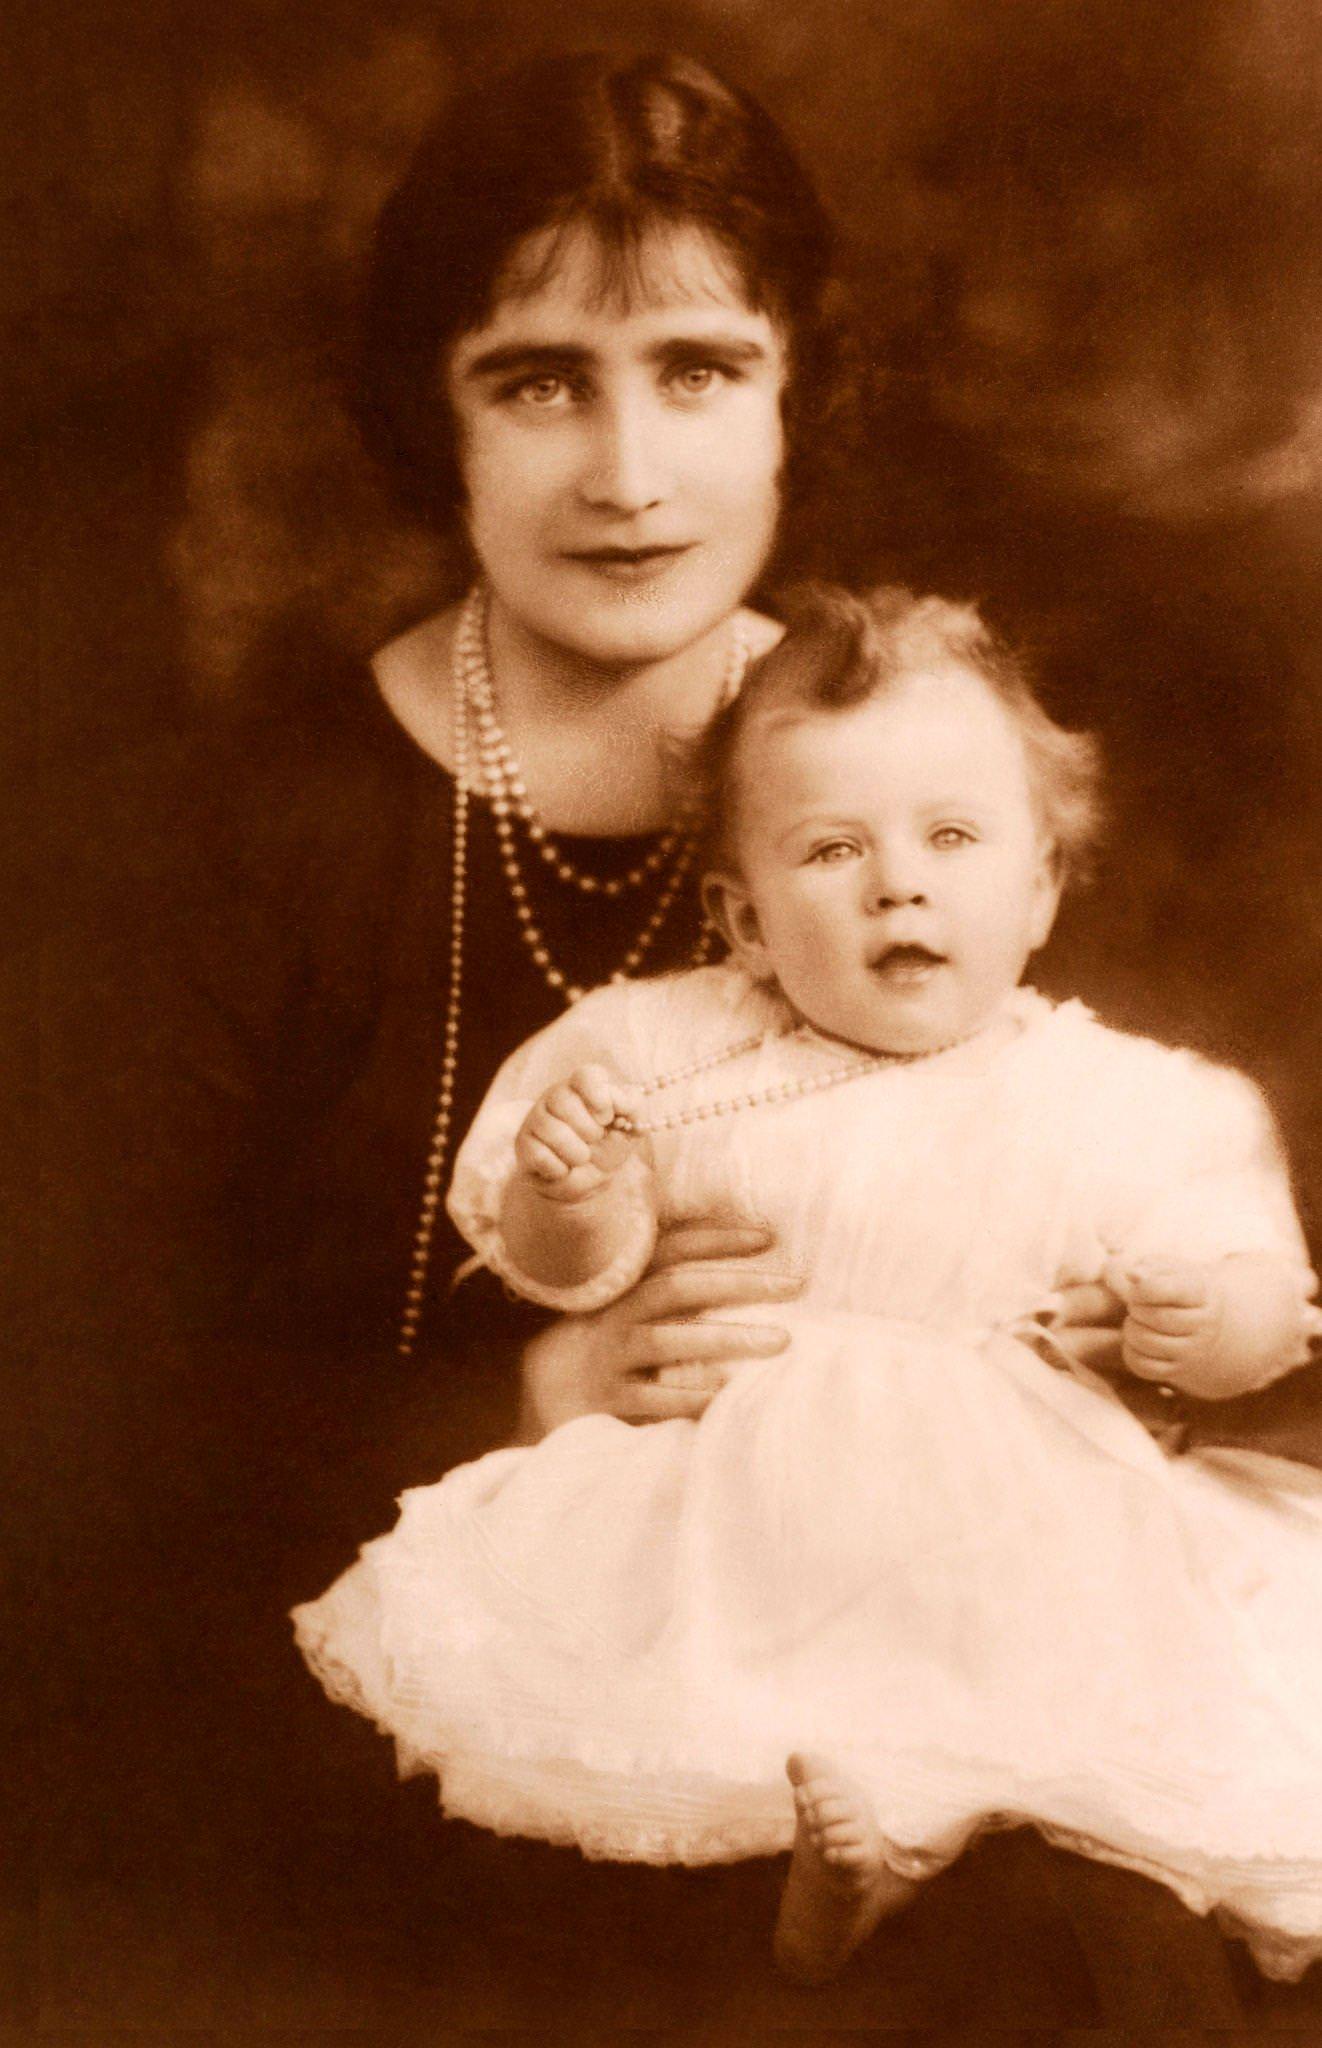 The Duchess of York, later Queen Elizabeth, The Queen Mother, with her first daughter, The Princess Elizabeth, later Queen Elizabeth II, 1926.